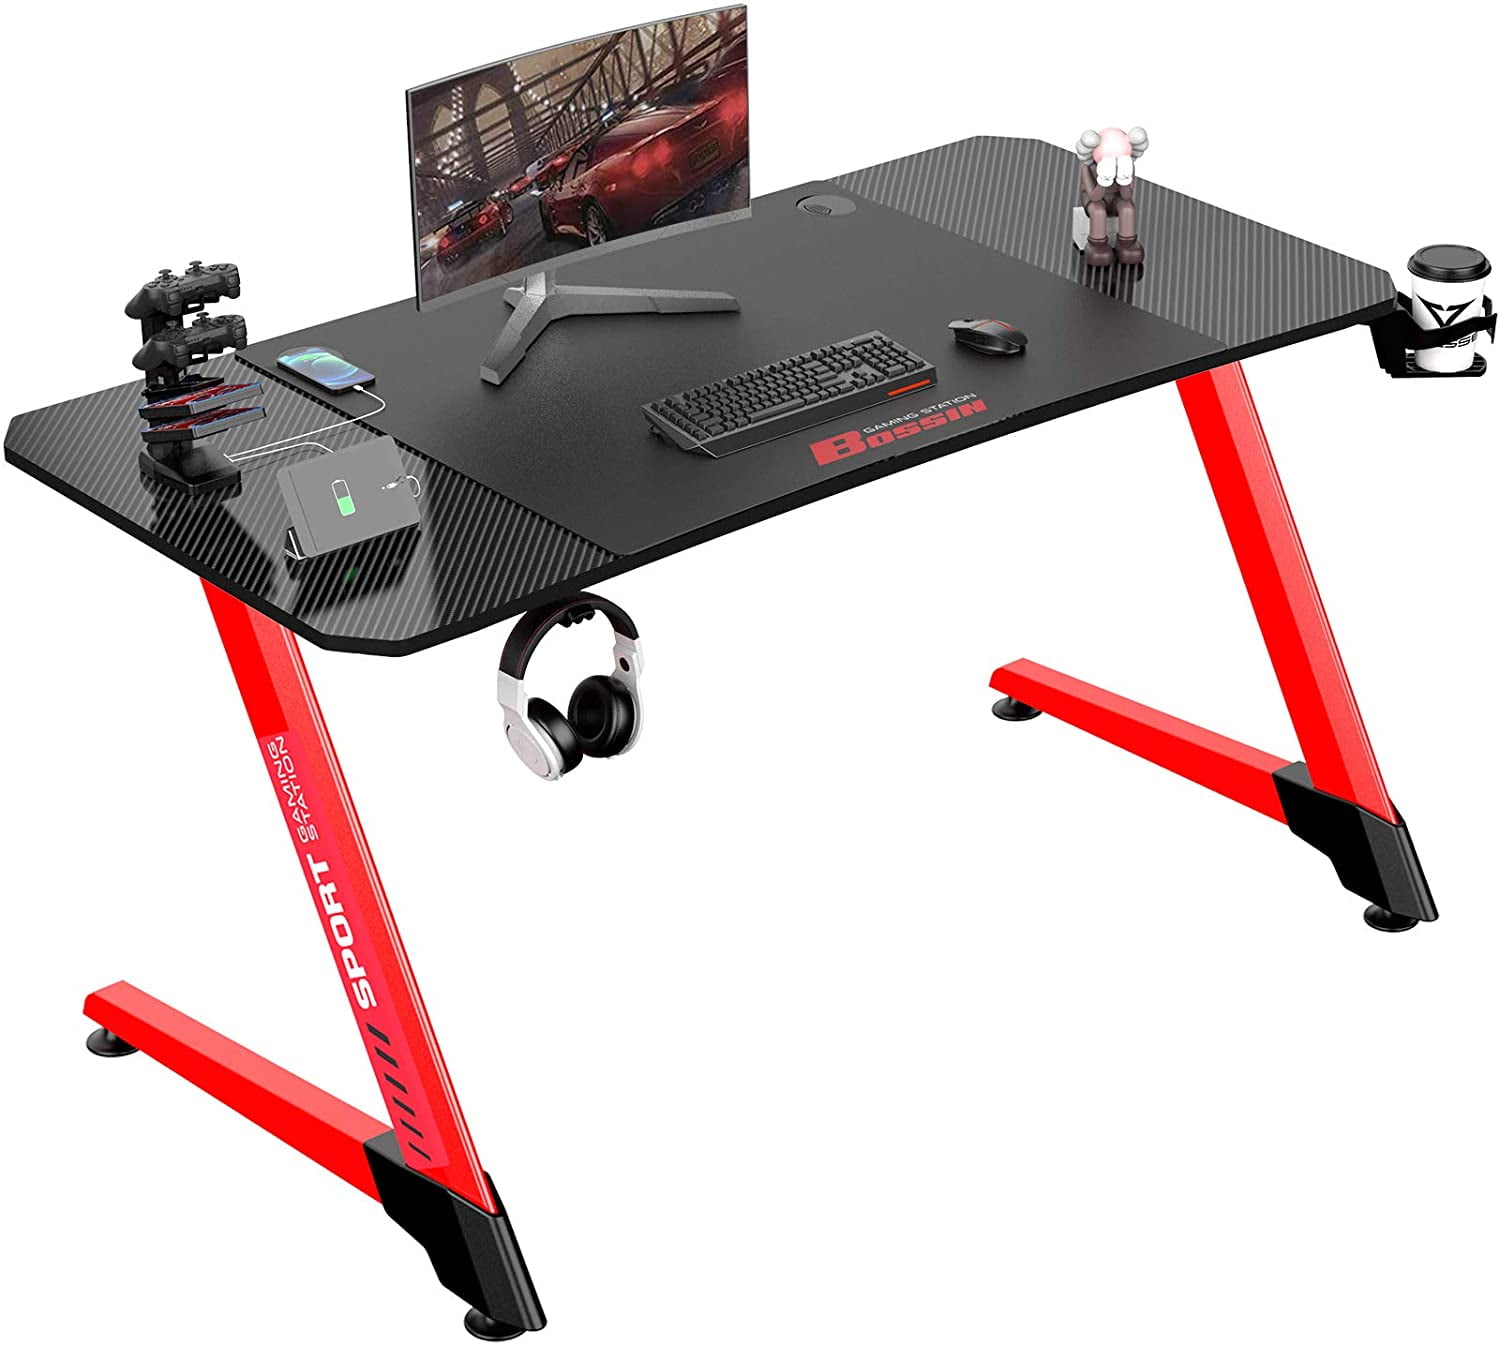  Sleepmax 63 Inch Gaming Desk, Heavy-Duty Gaming Computer Table  with Carbon Fiber Surface & Large Mouse Pad, Black PC Desk Gamer Setup with  Cup Holder, Headphone Hook & Adapter Organizer 